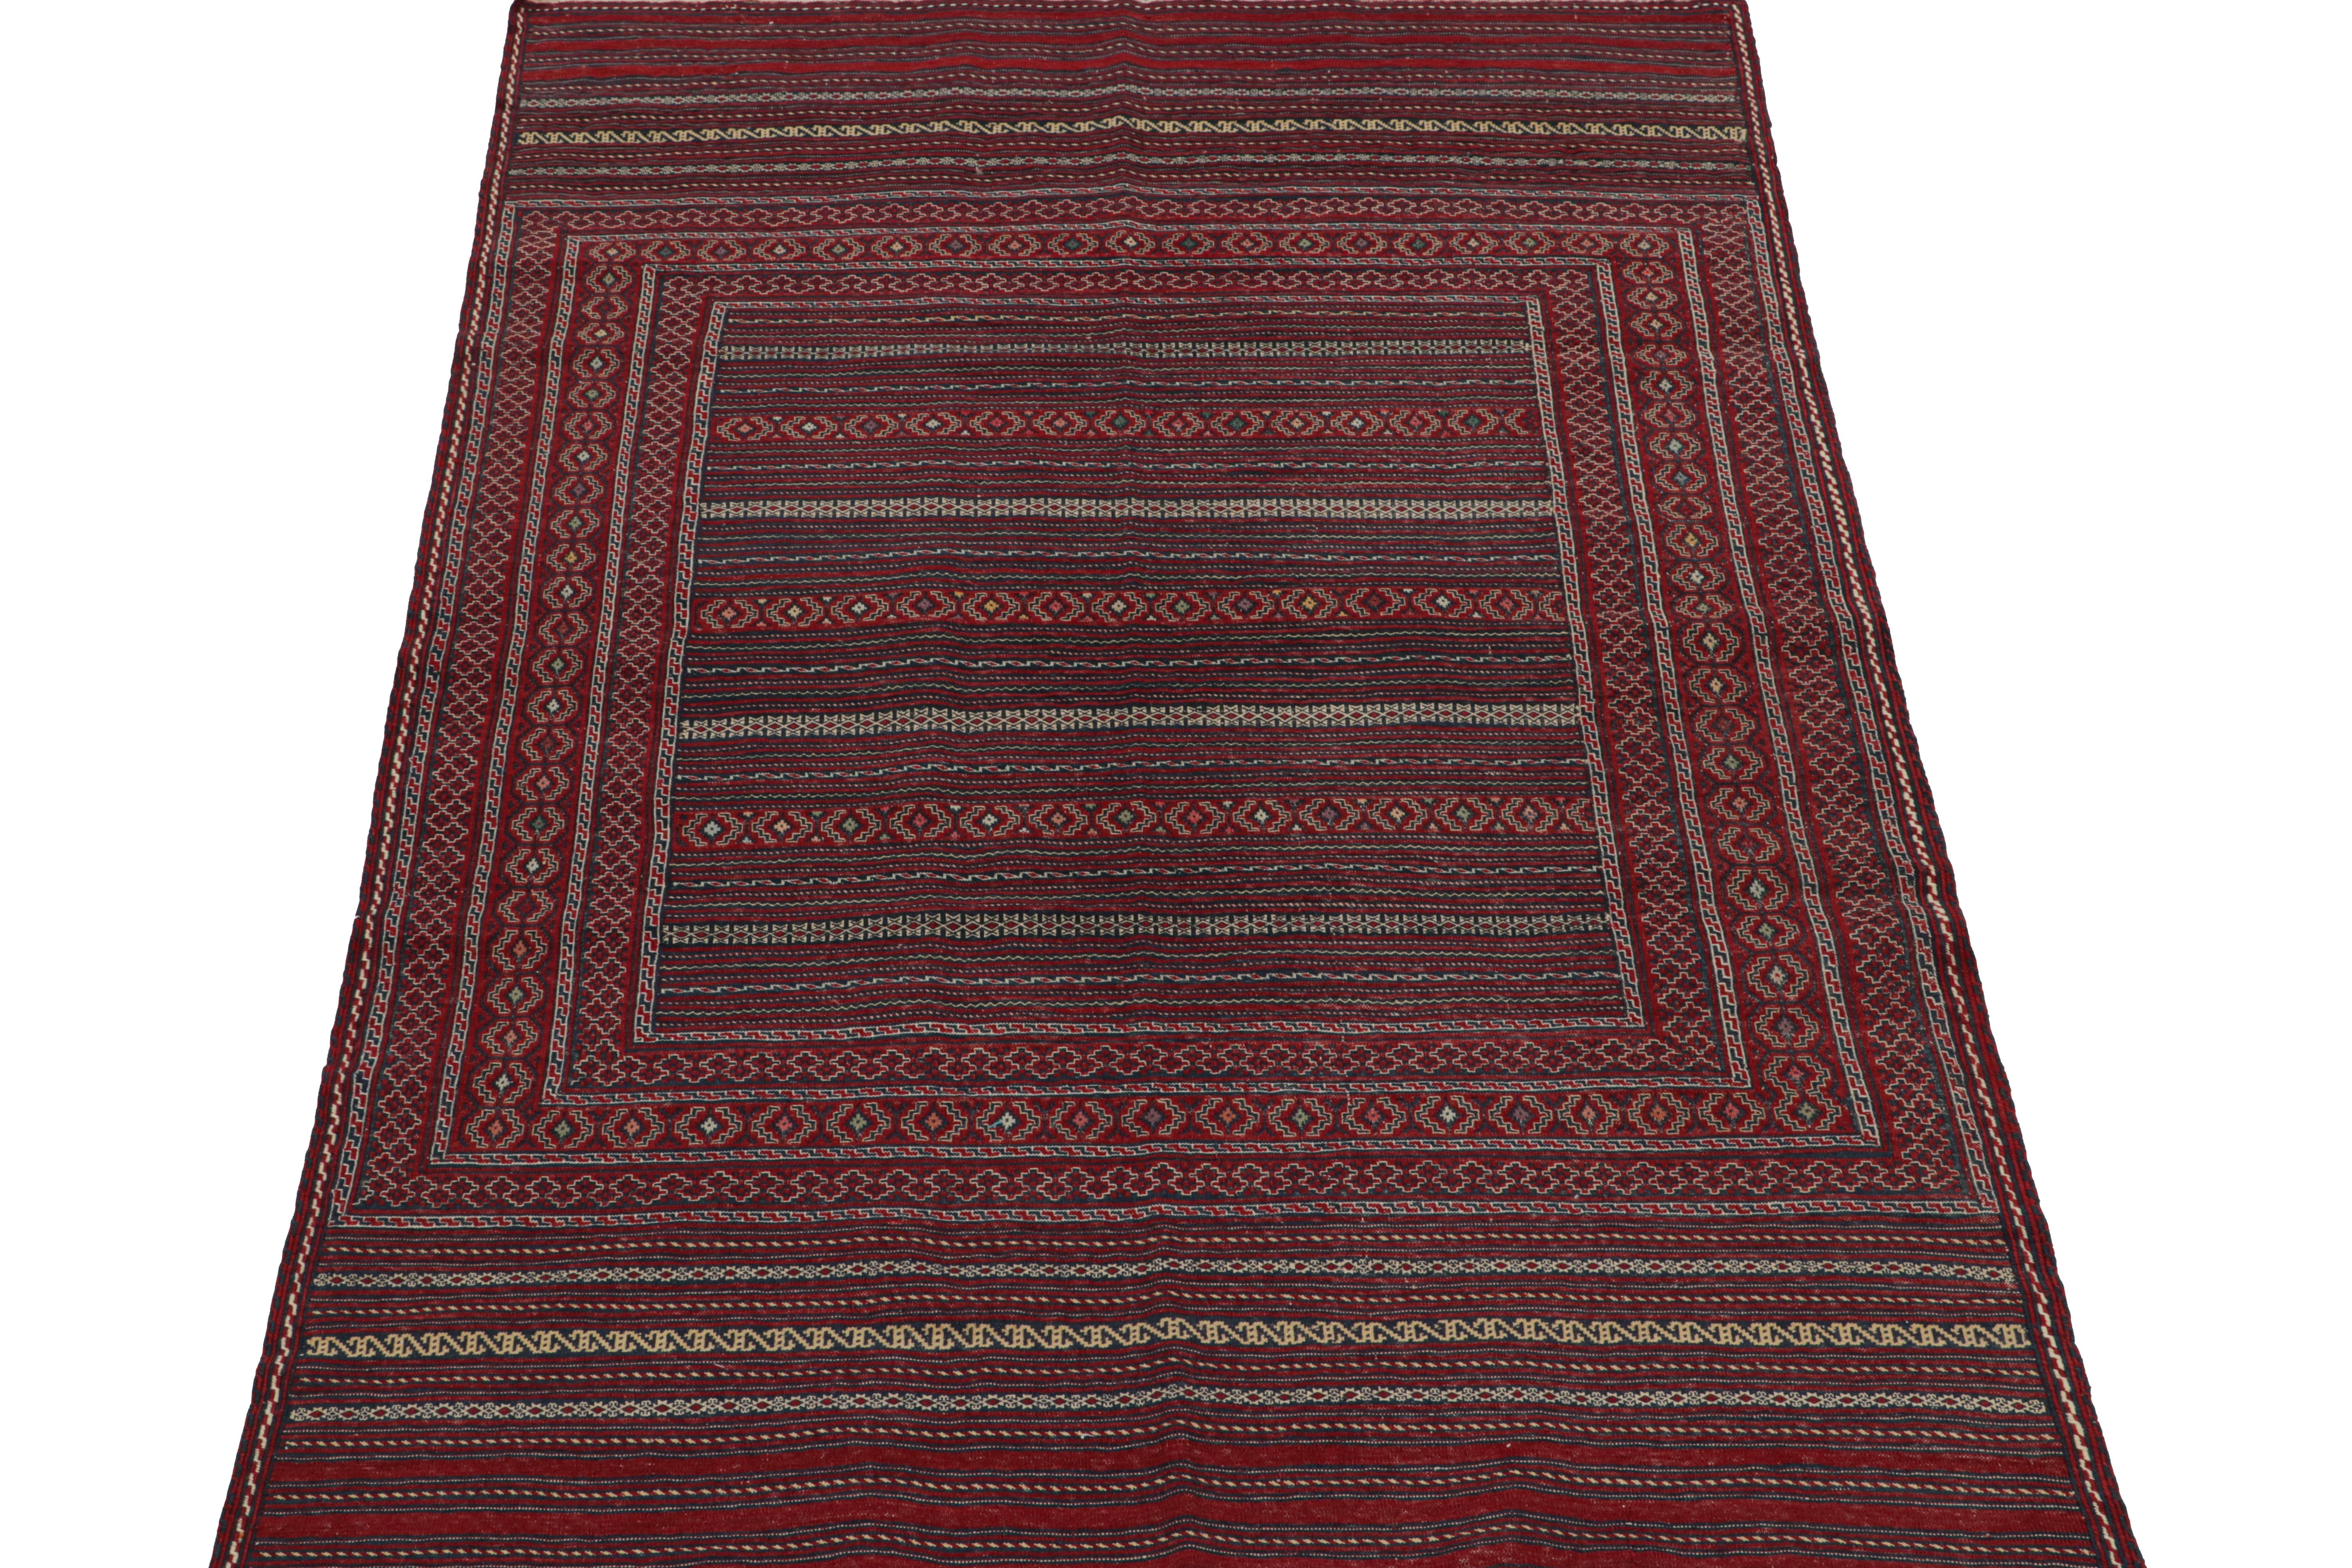 Afghan Vintage Baluch Tribal Kilim with Red & Blue Geometric Patterns, from Rug & Kilim For Sale